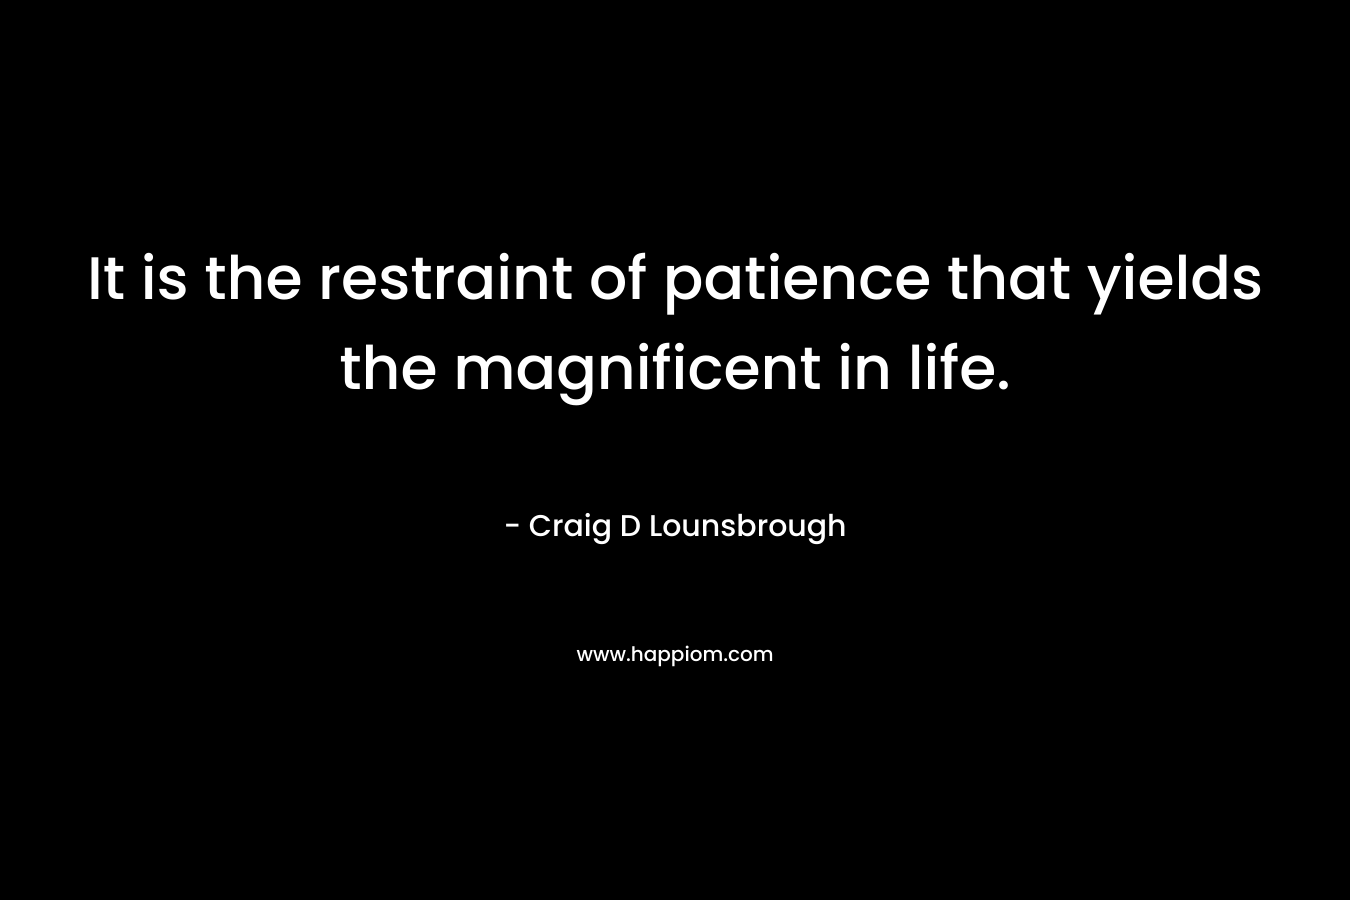 It is the restraint of patience that yields the magnificent in life.